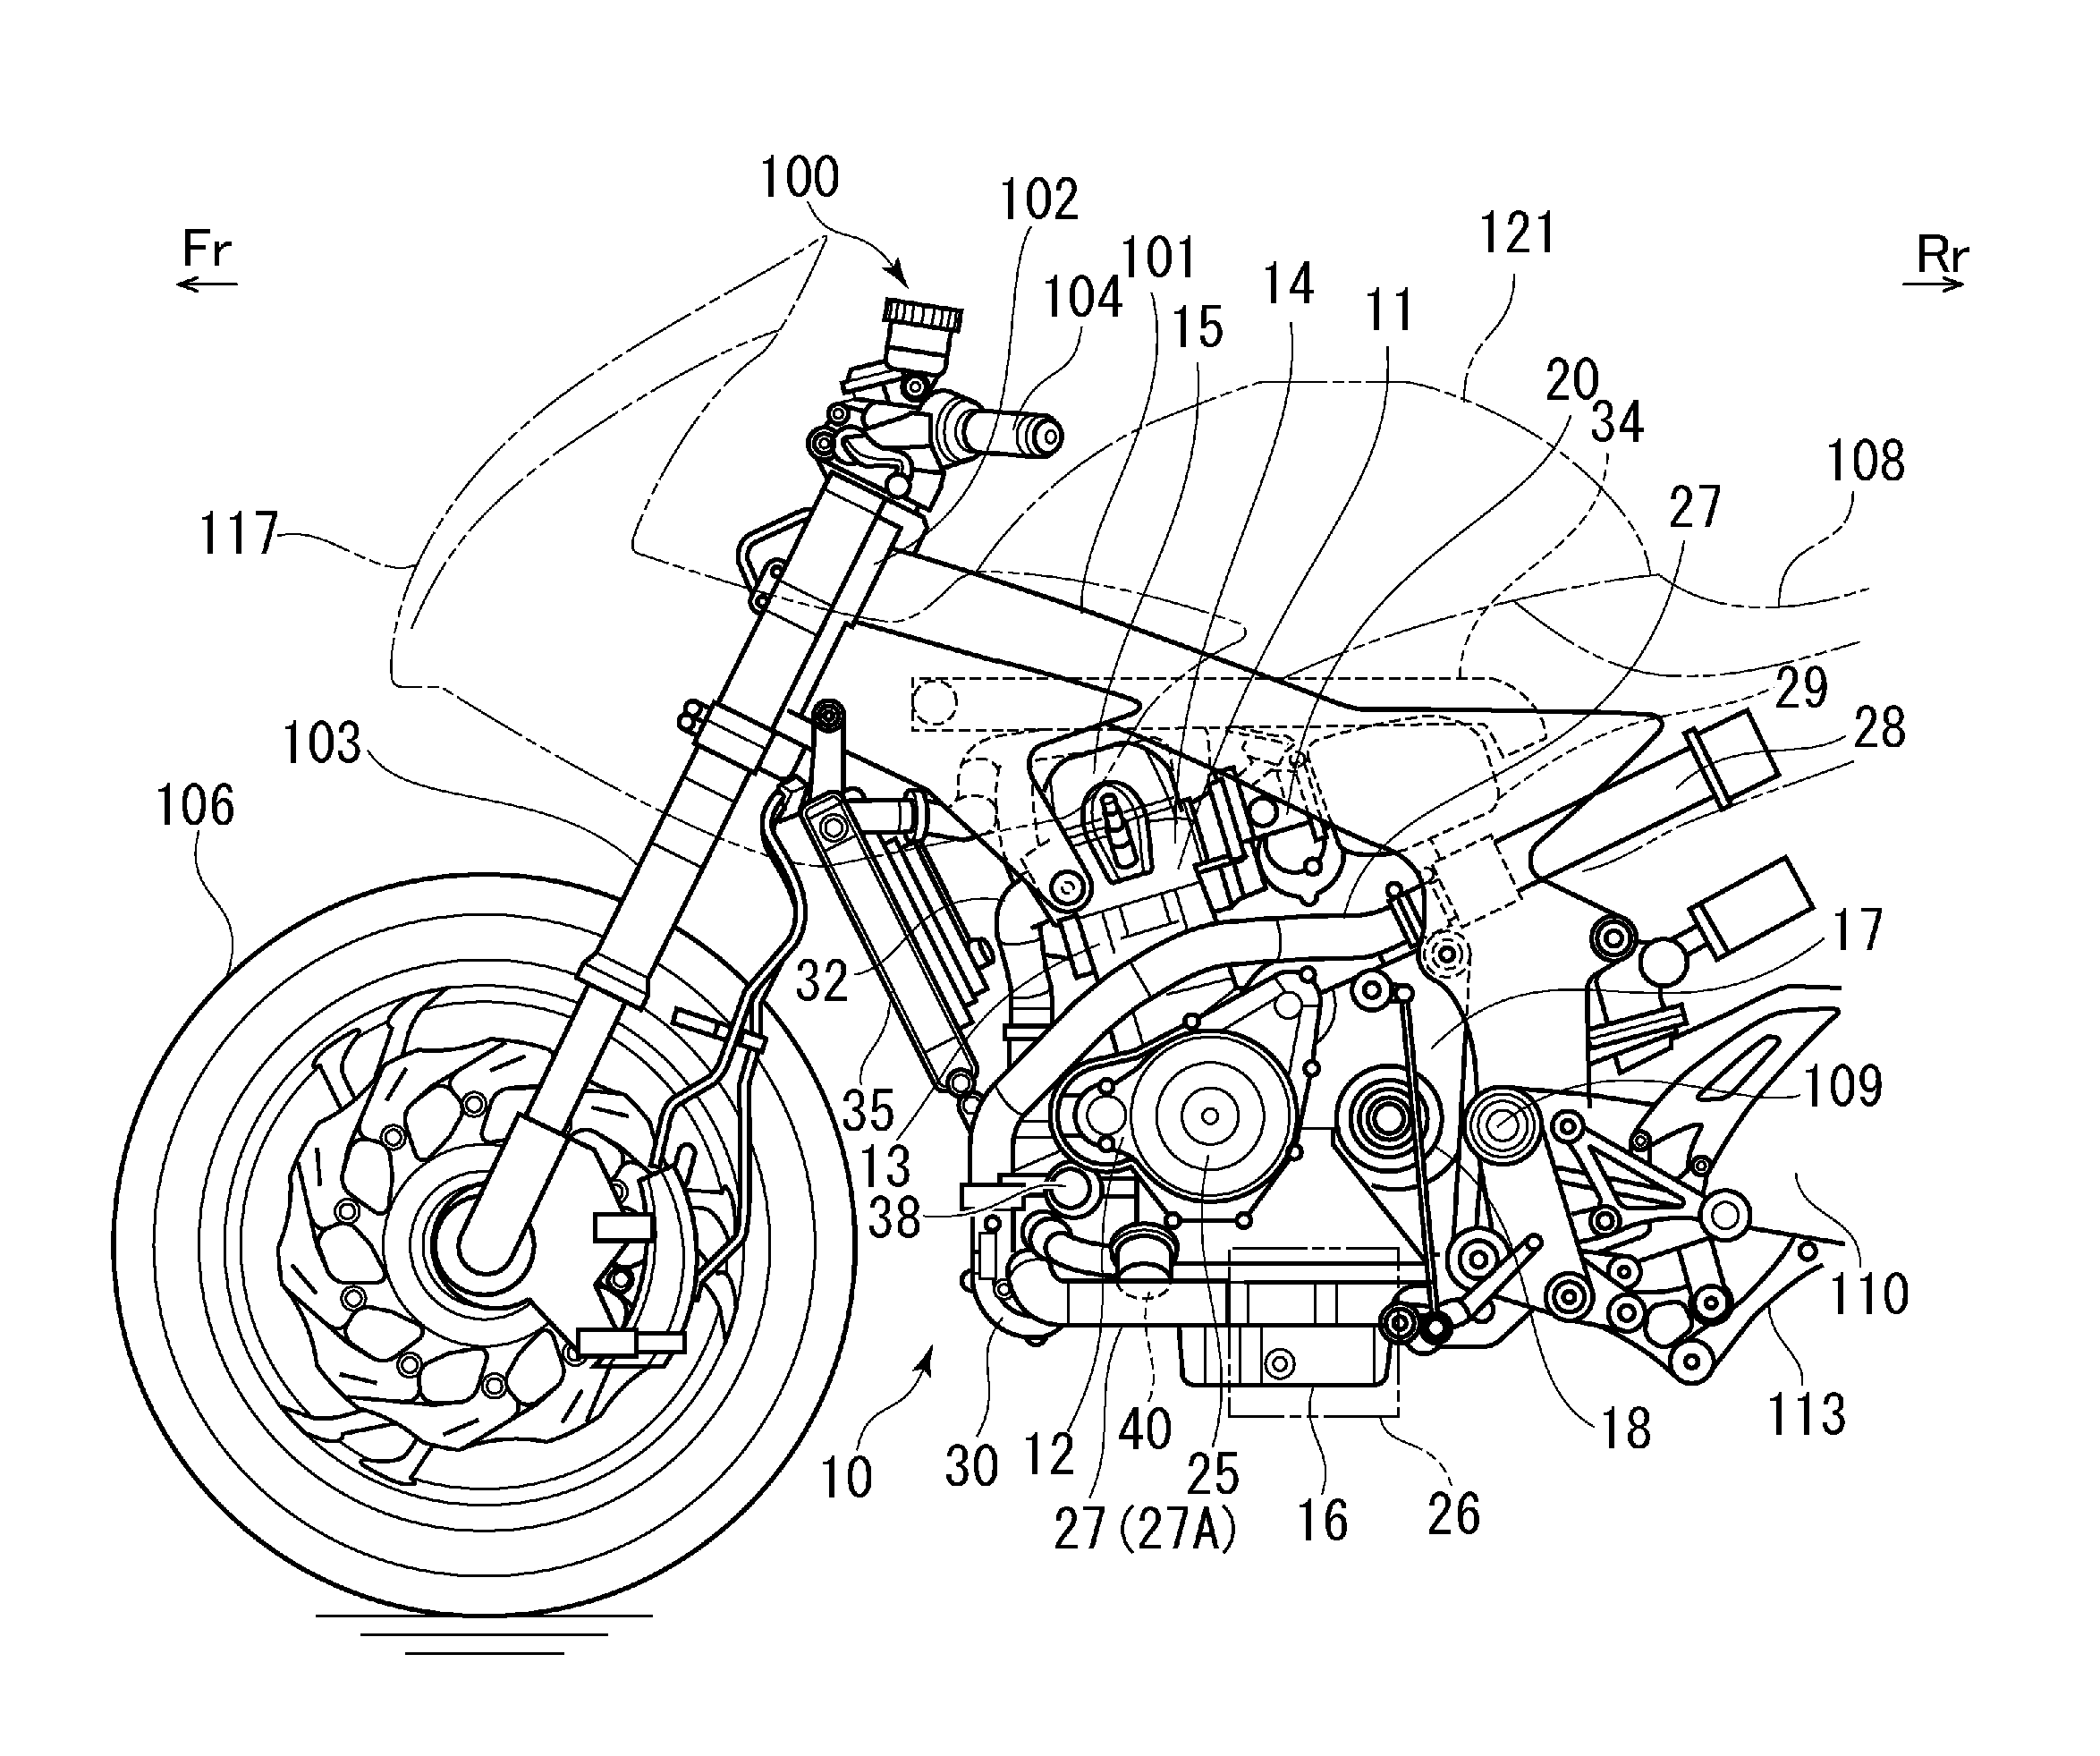 Motorcycle with turbocharger